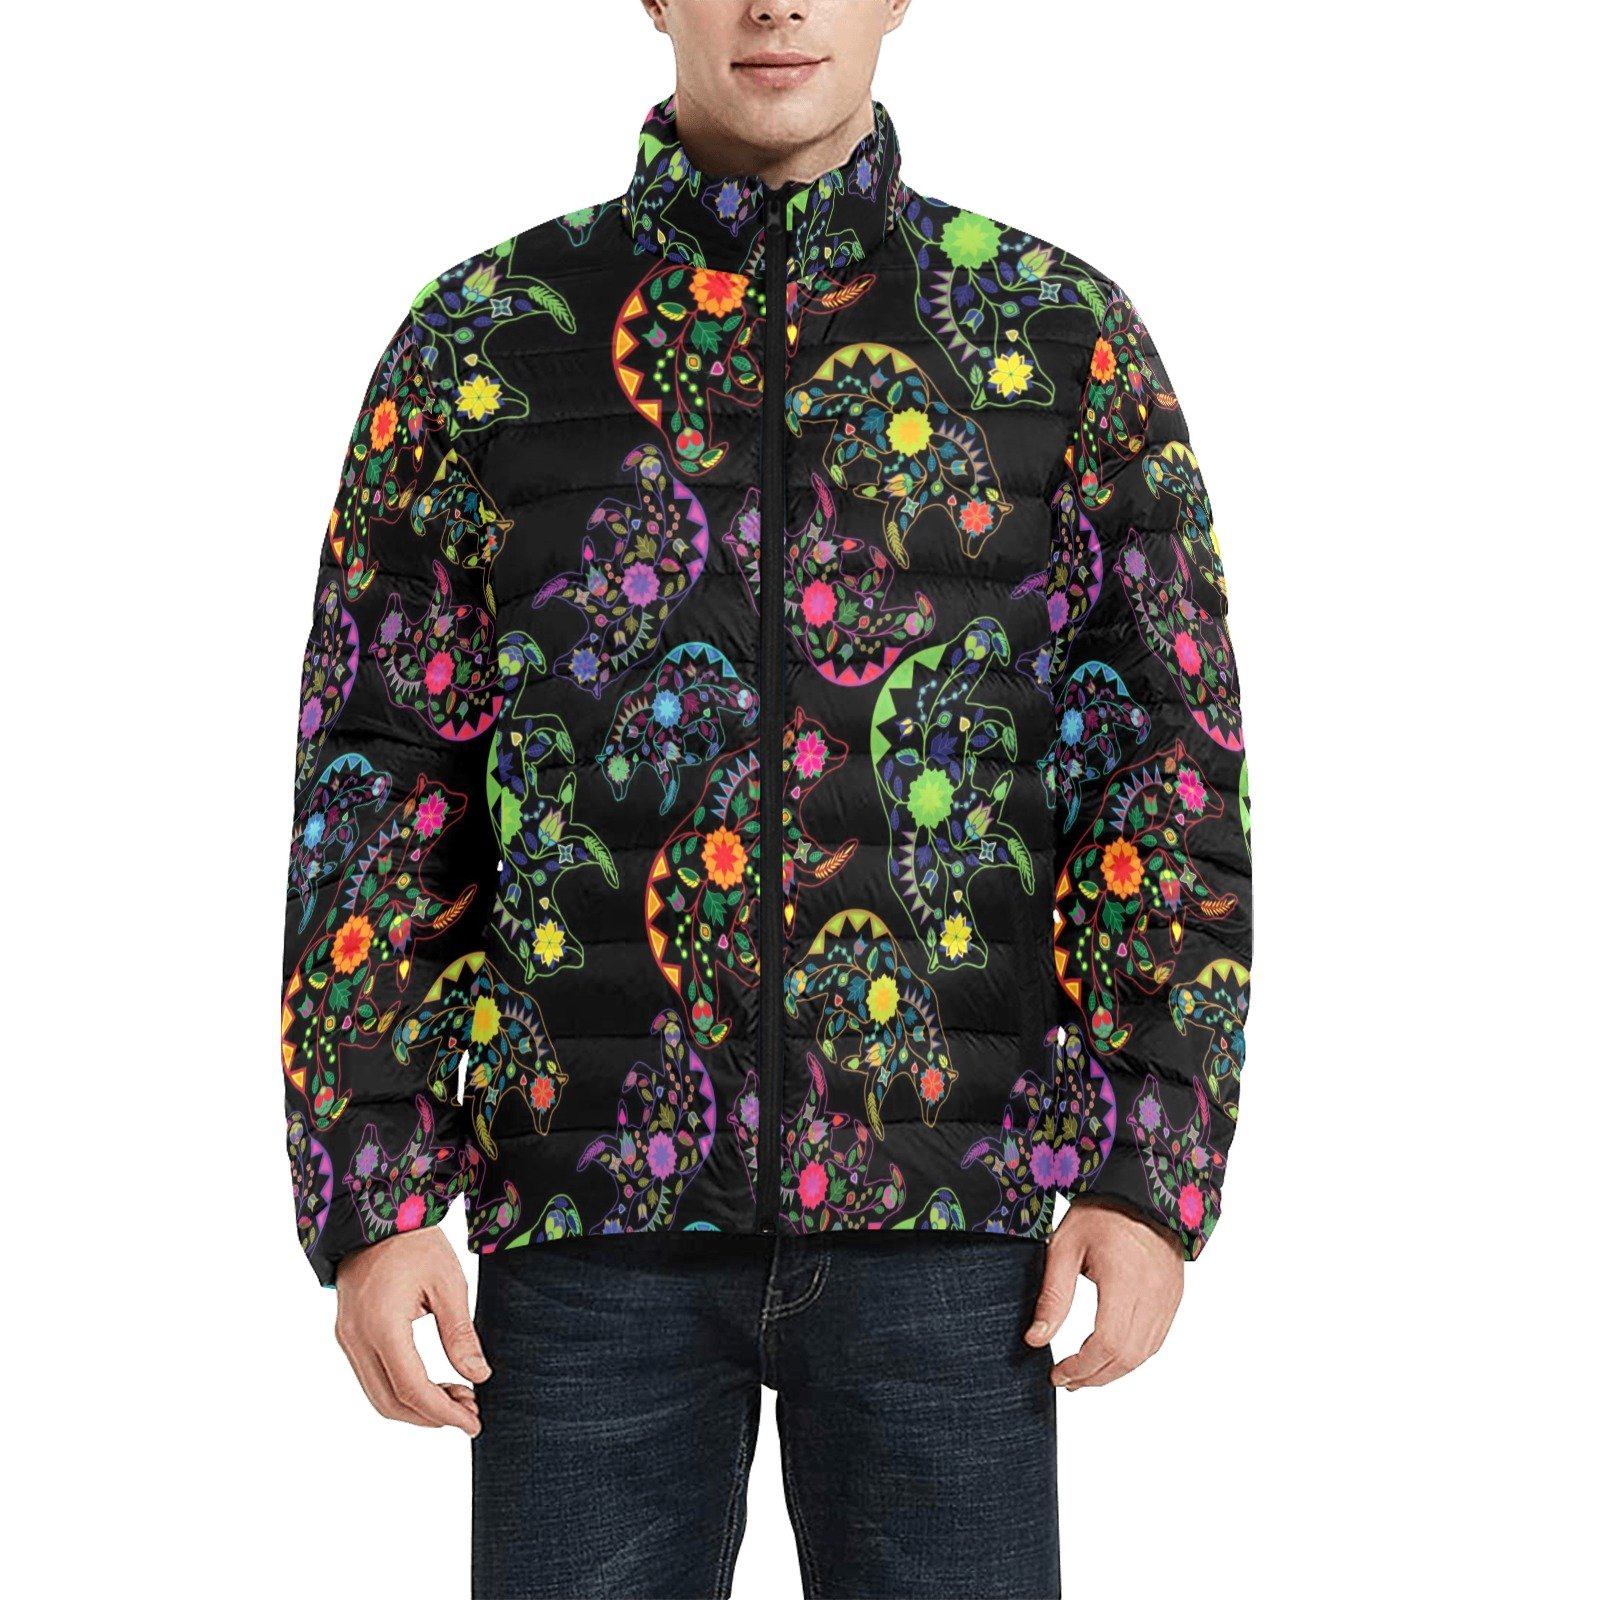 Floral Bear Men's Stand Collar Padded Jacket (Model H41) Men's Stand Collar Padded Jacket (H41) e-joyer 